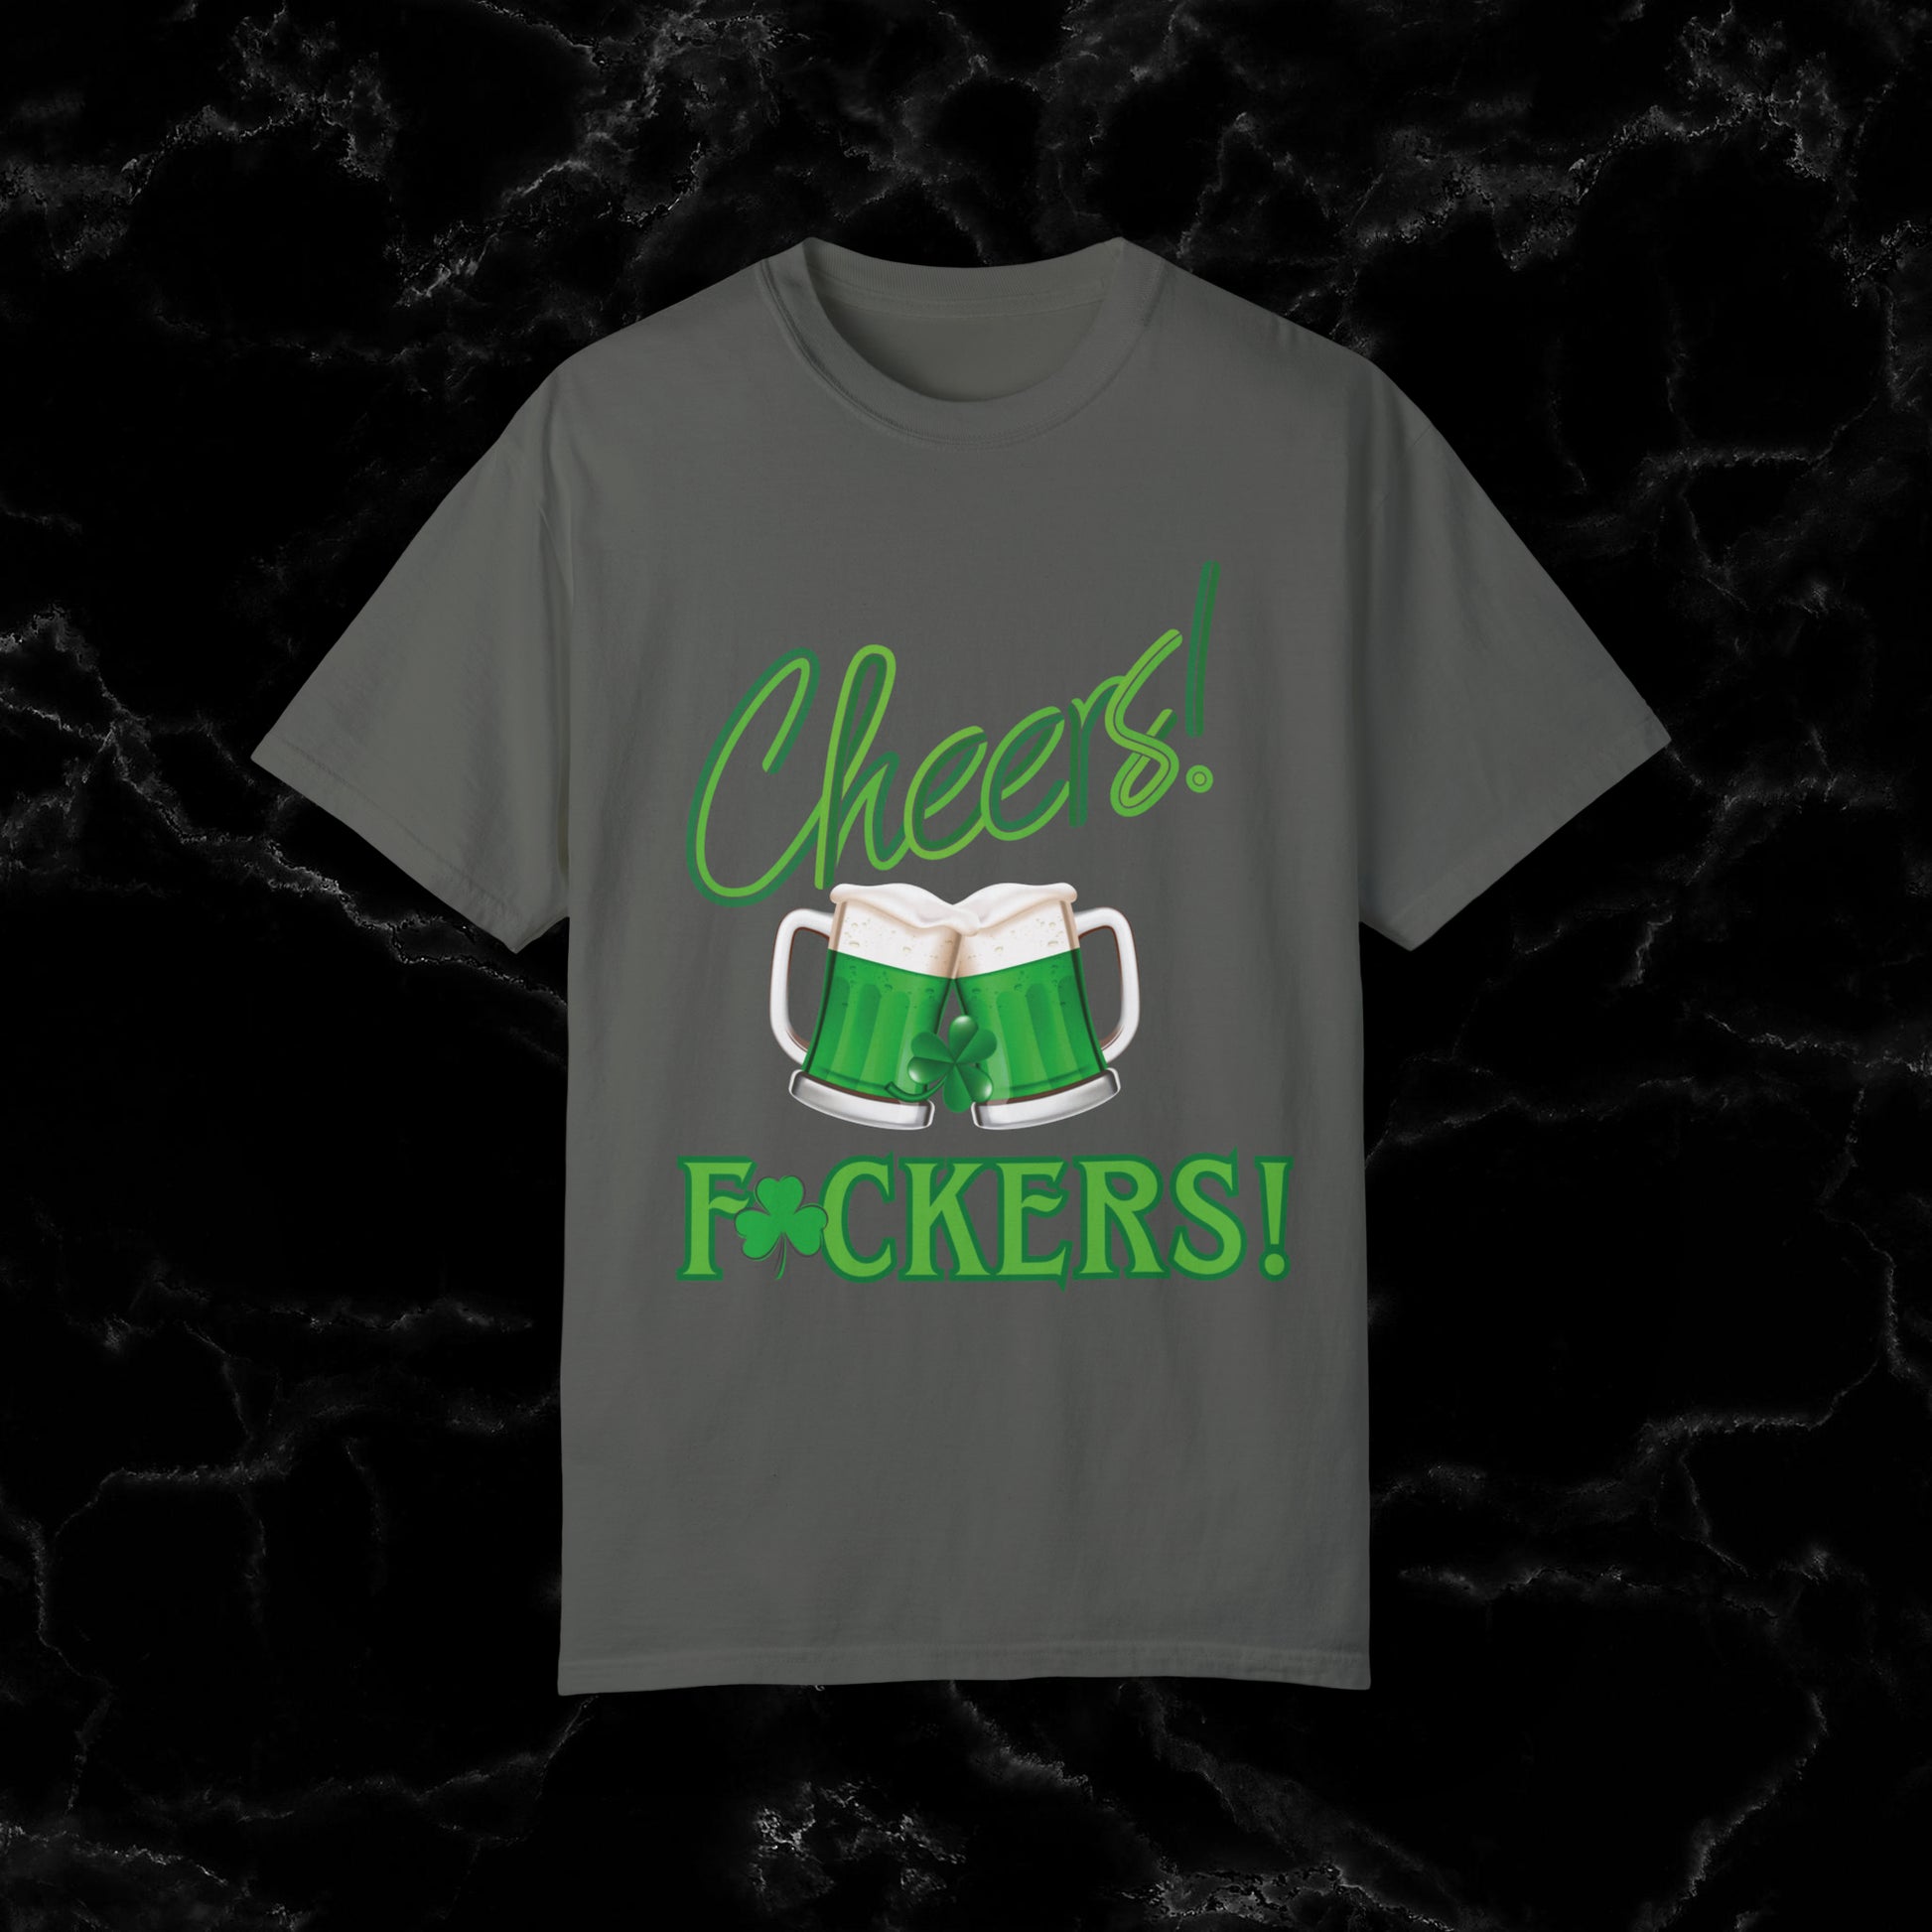 Cheers F**kers Shirt - A Bold Shamrock Statement for Irish Spirits and Good Times T-Shirt Pepper S 